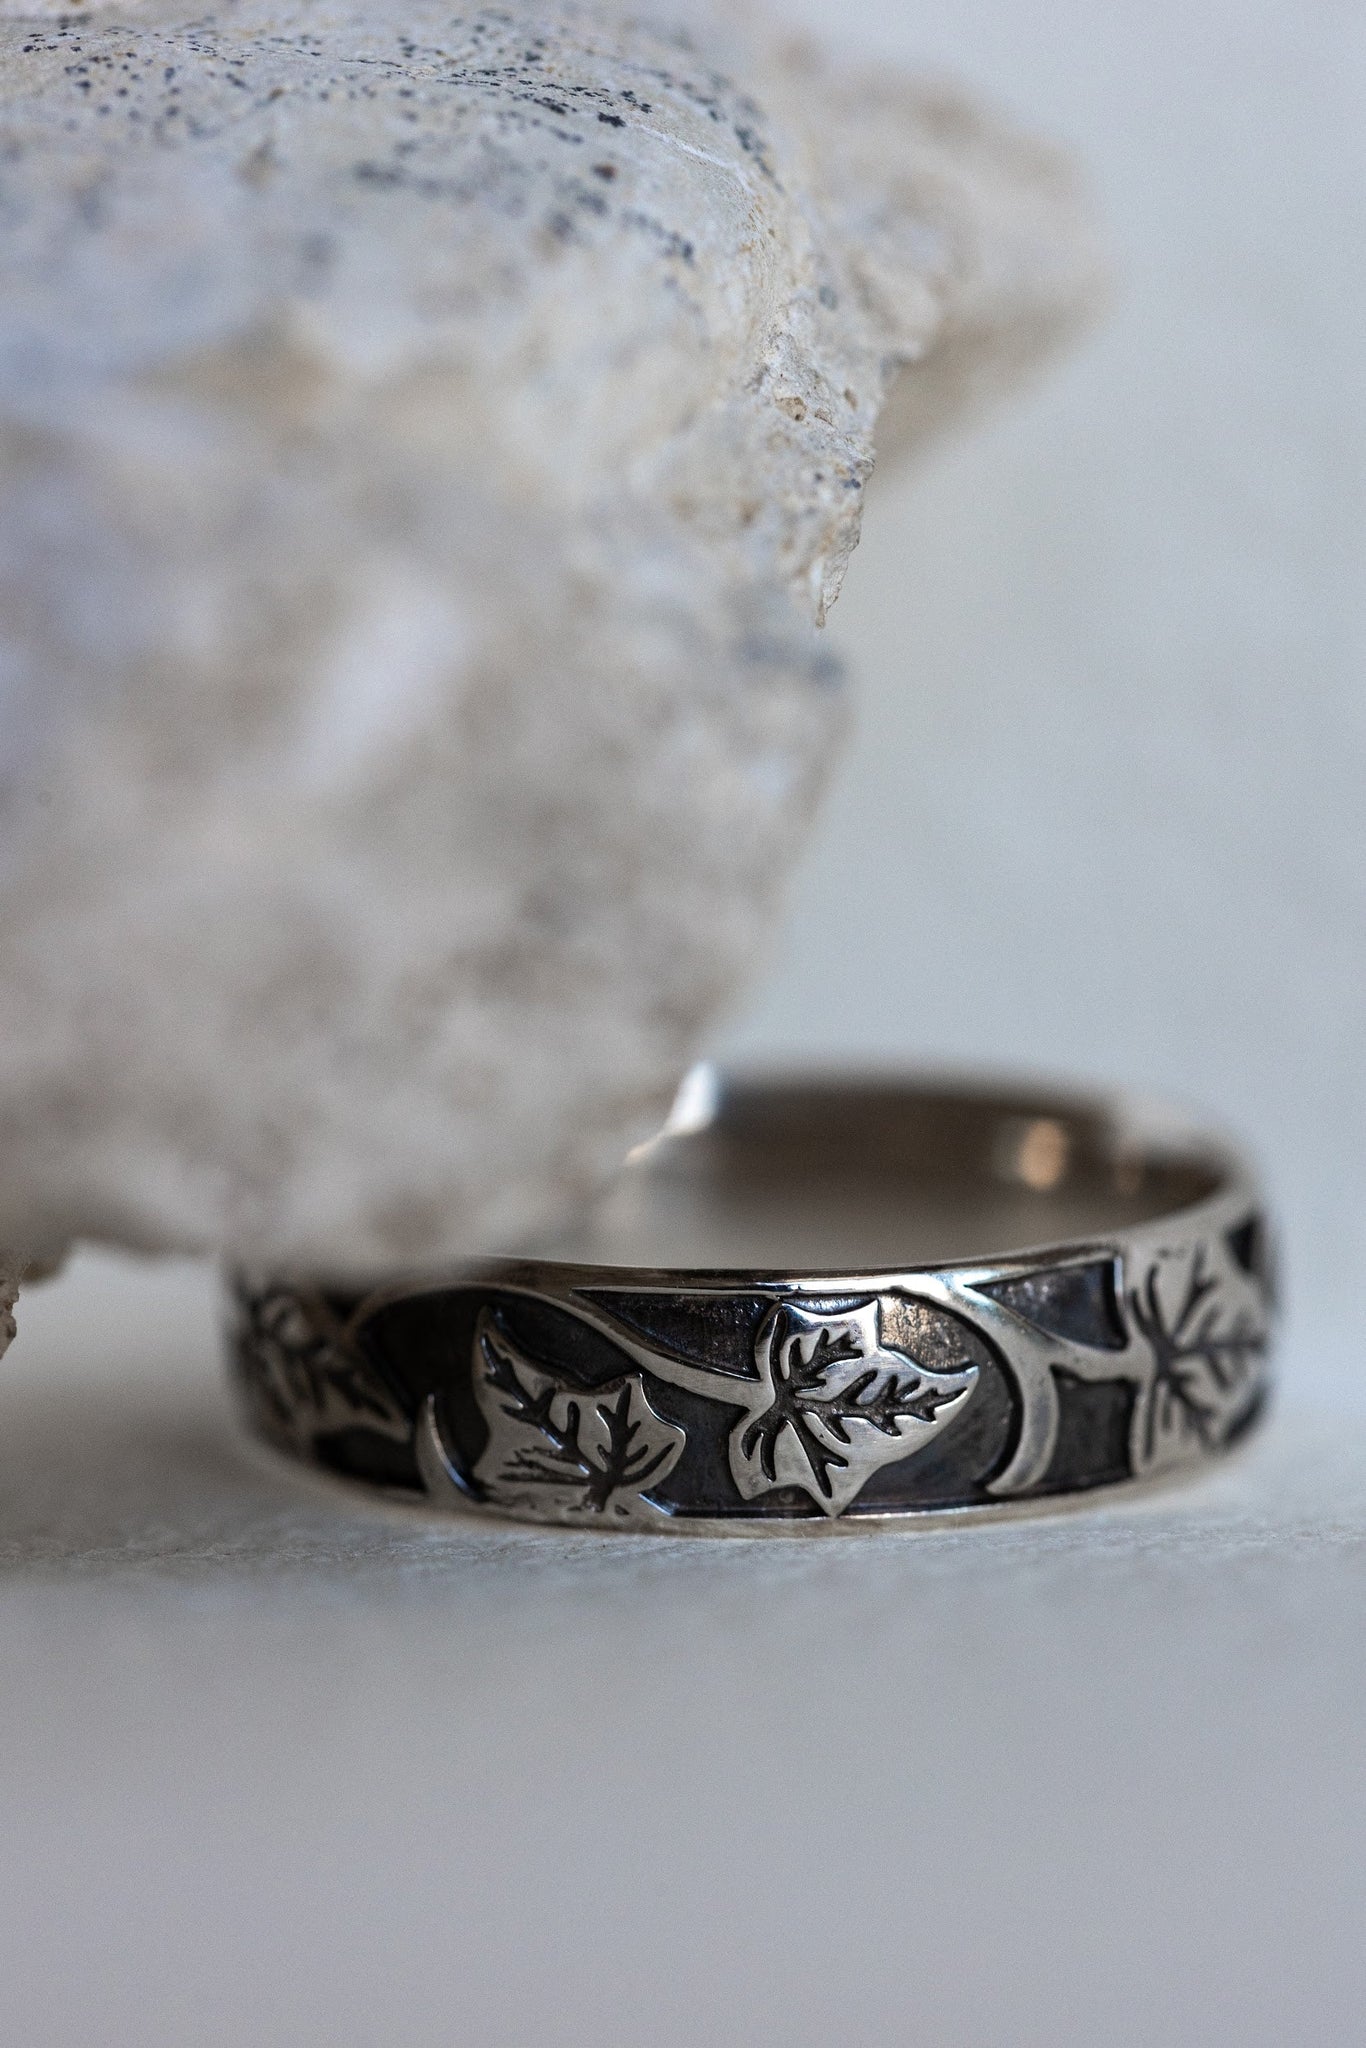 White gold ivy leaves pattern wedding band, men's wedding band with leaf motif - Eden Garden Jewelry™